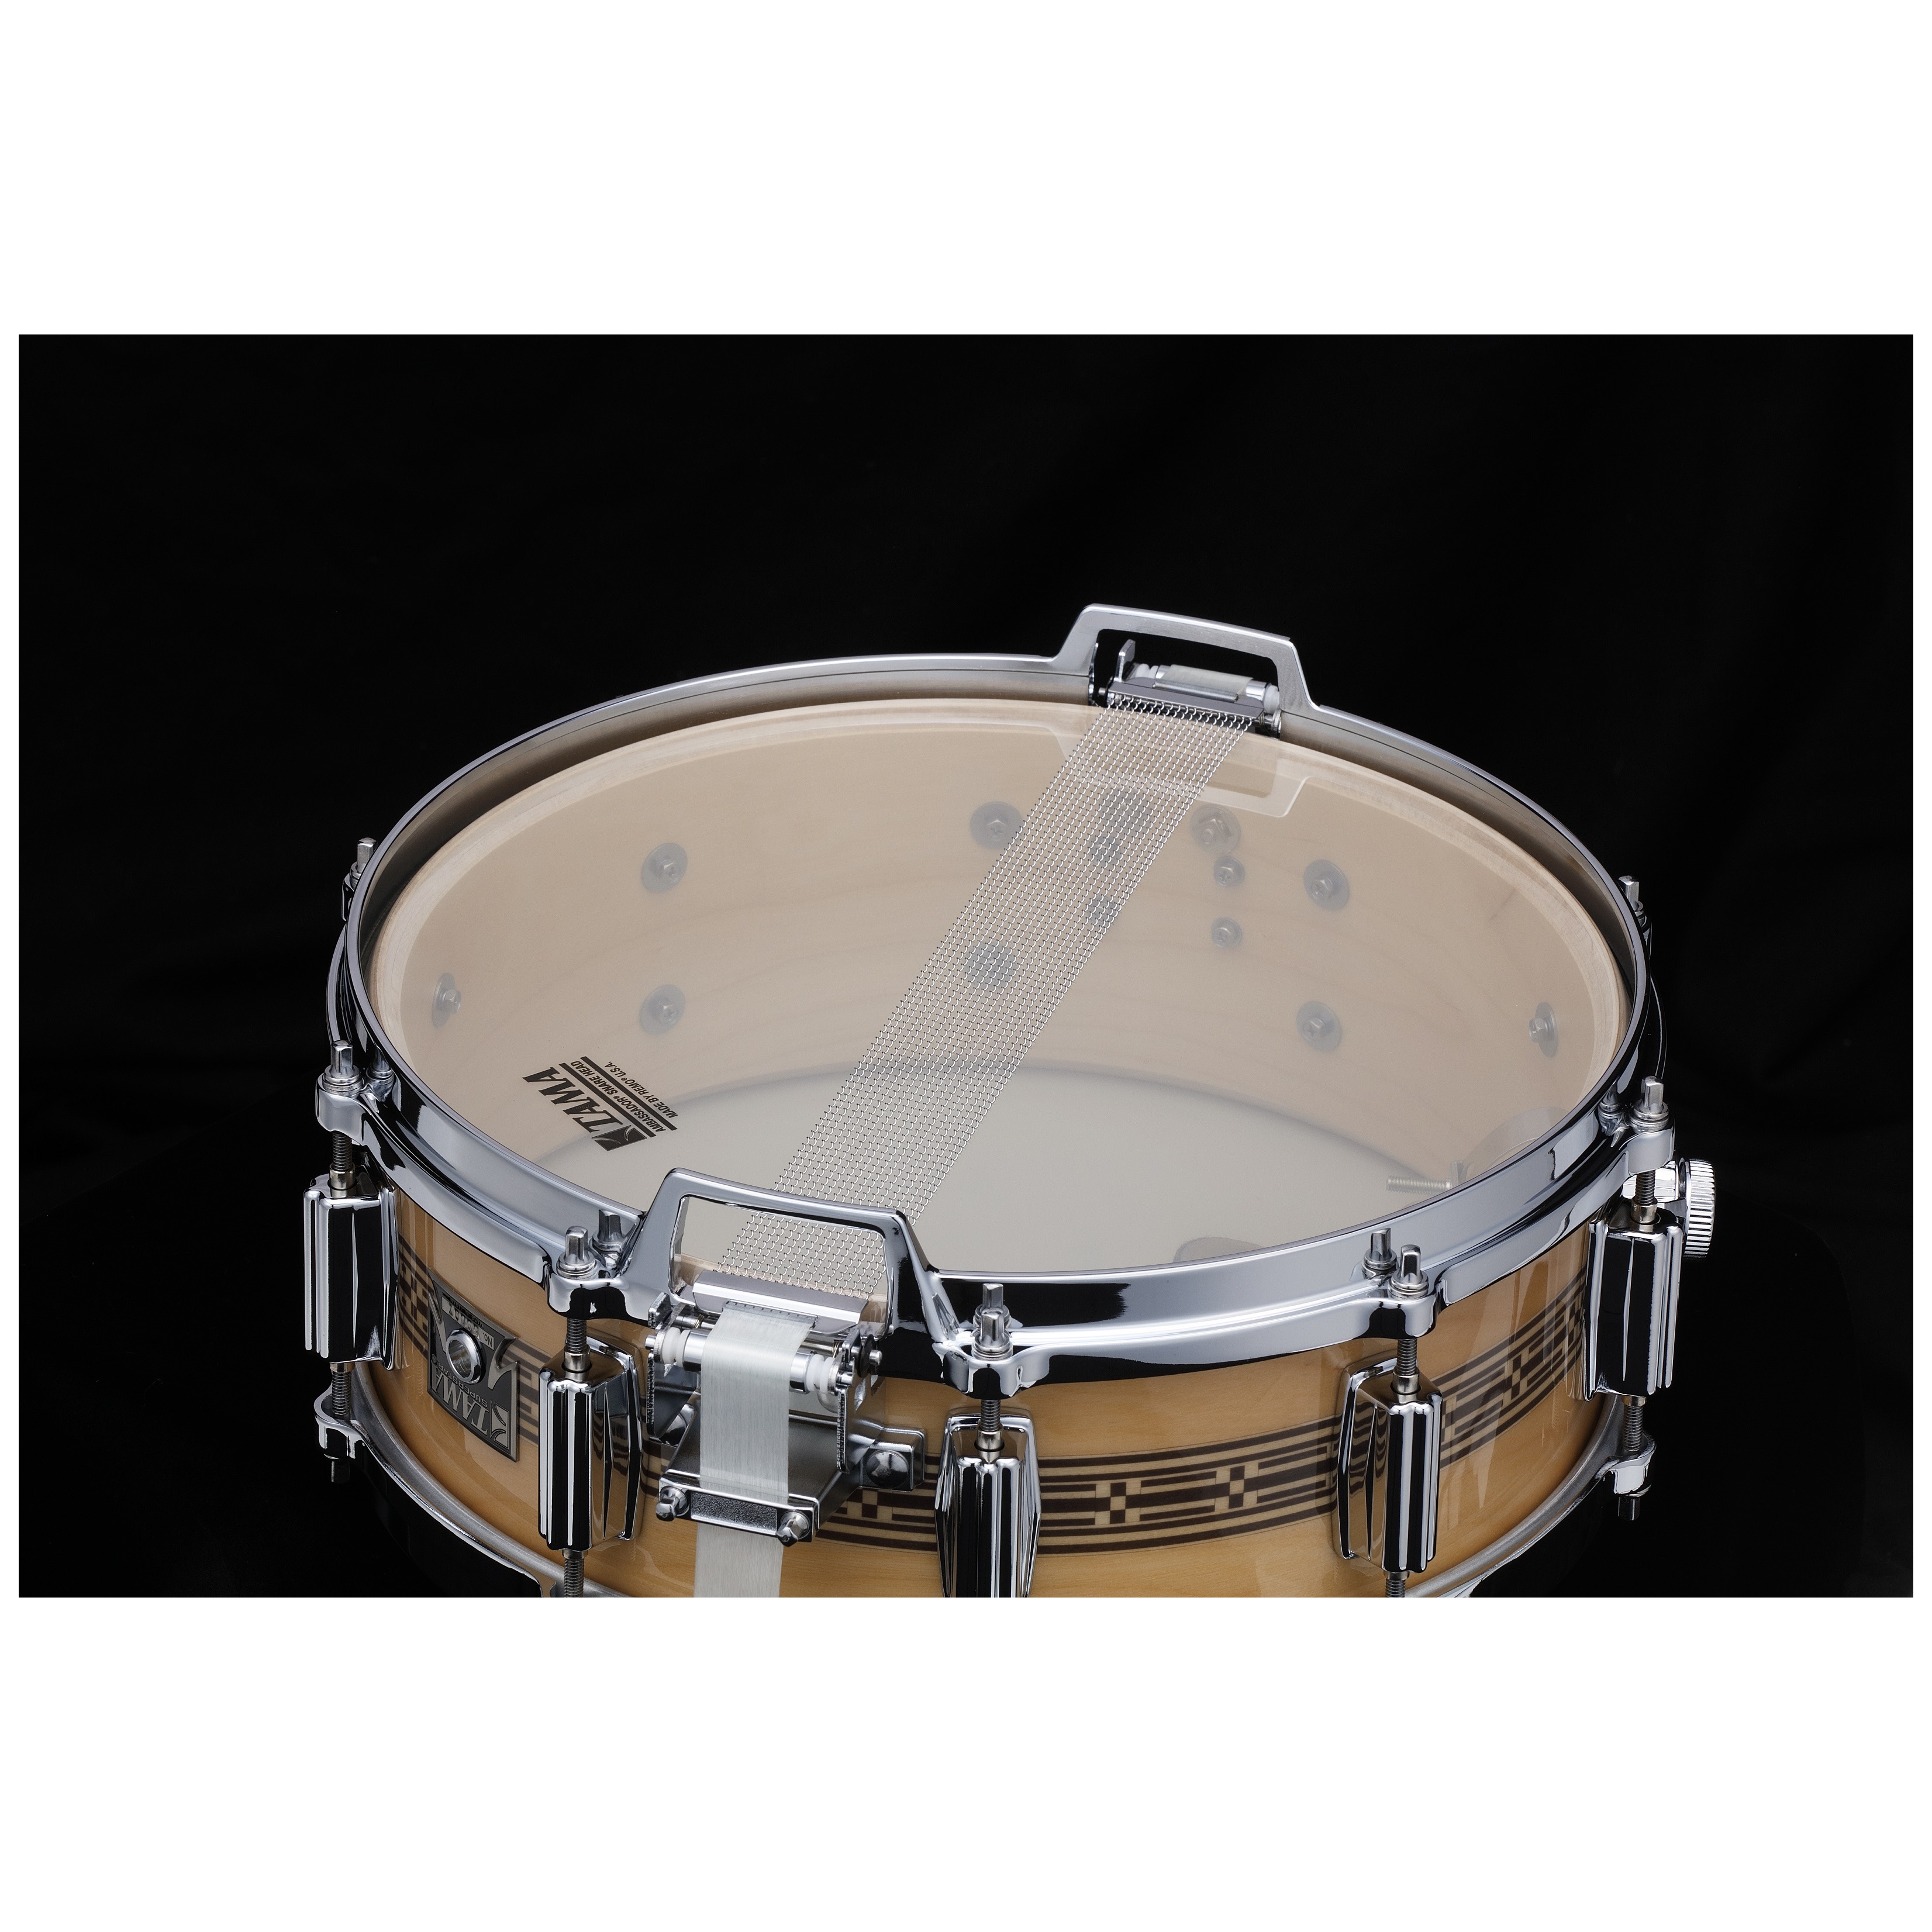 Tama AW-455 - 50th LIMITED Mastercraft Artwood Snare  Drum 14"x6,5" 4